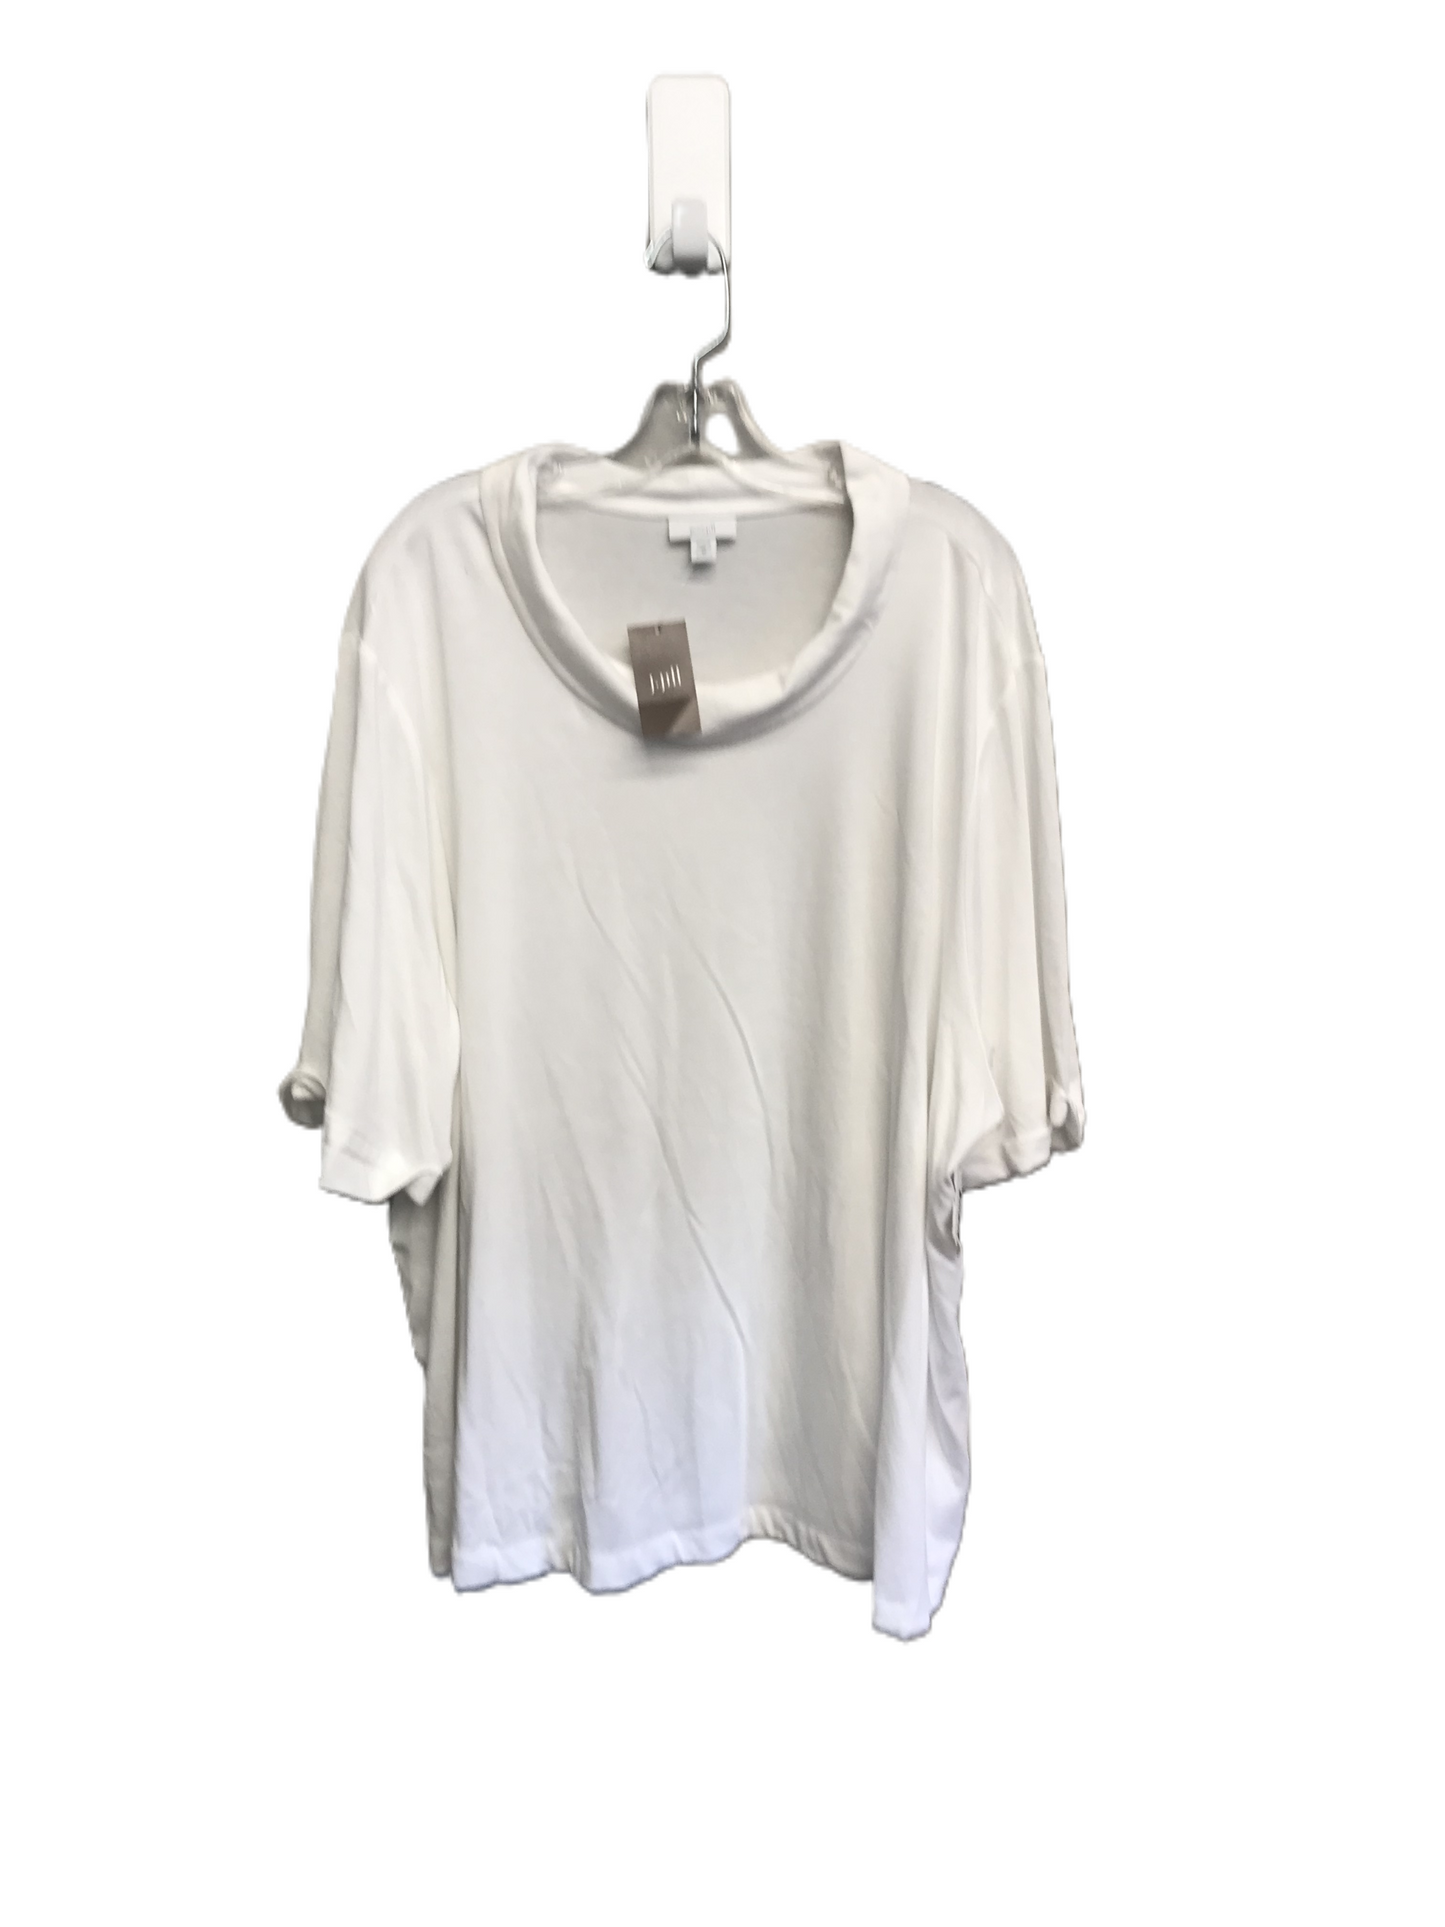 White Top Short Sleeve Basic By Pure Jill, Size: 4x